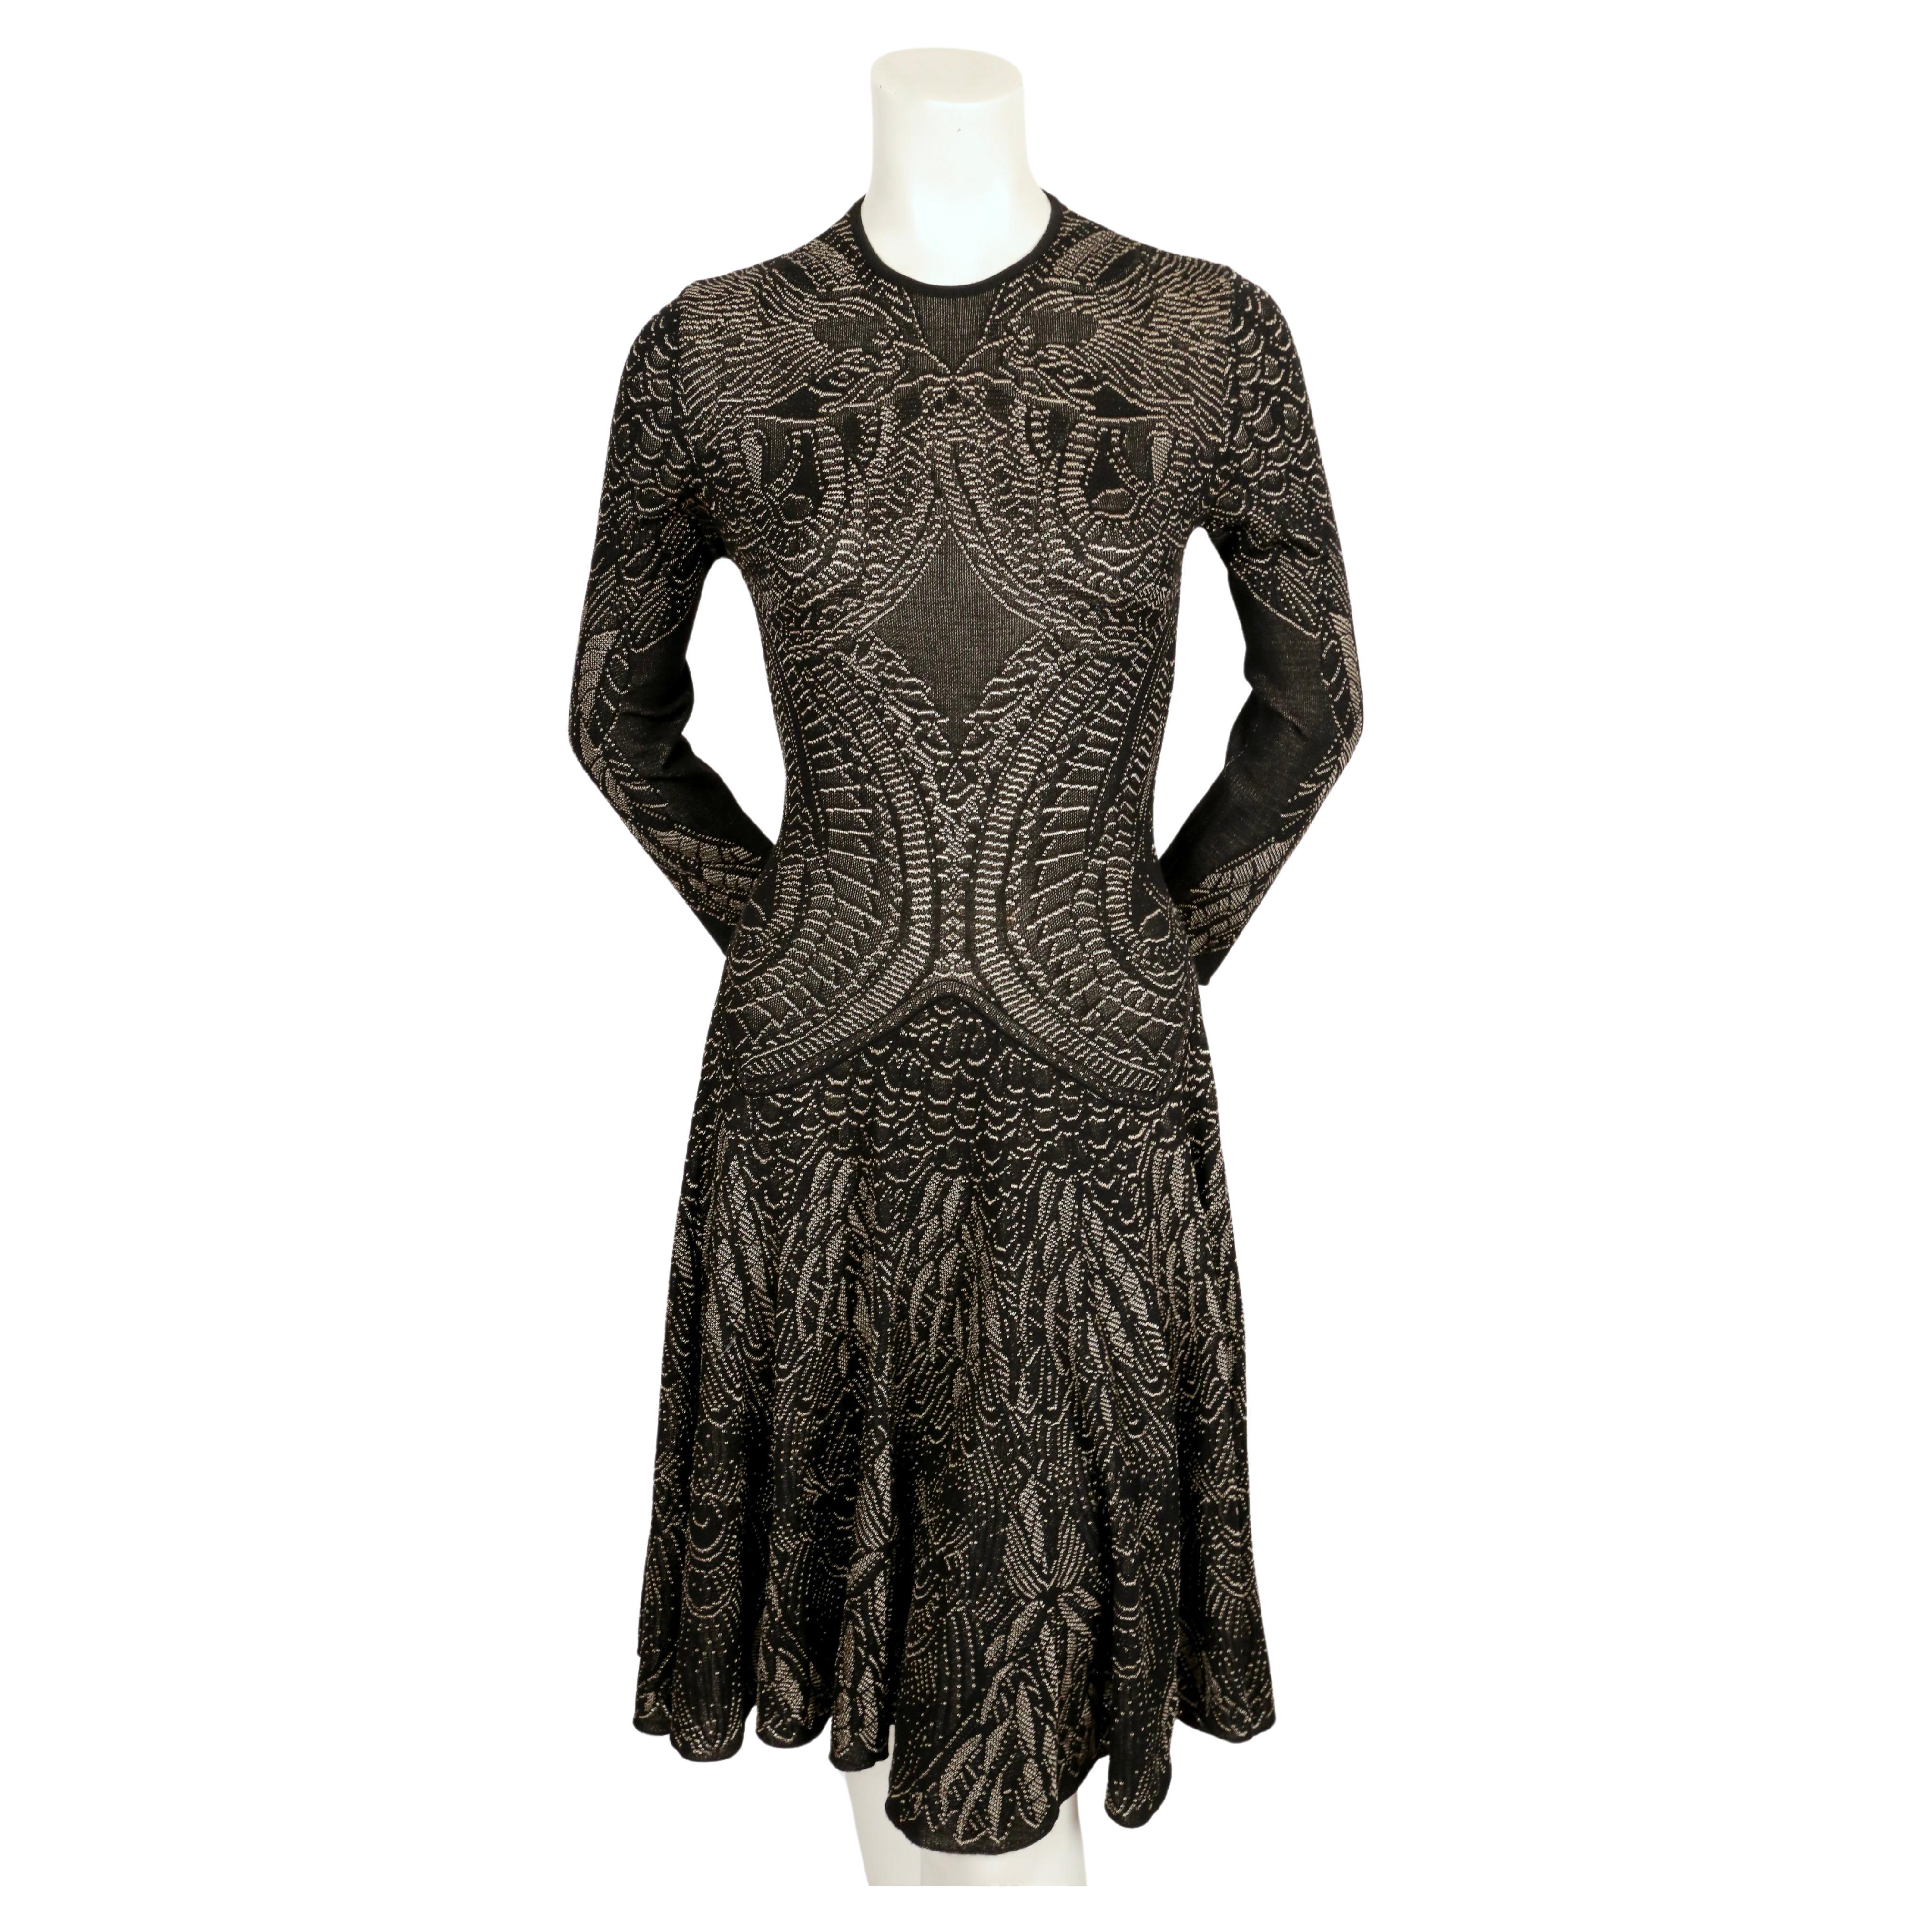 Very rare intarsia knit dress with wing motif and three-quarter sleeves created by Alexander McQueen dating to fall of 2010. No size indicated although this best fits a S or M. Approximate measurements (unstretched):  shoulder 14.5